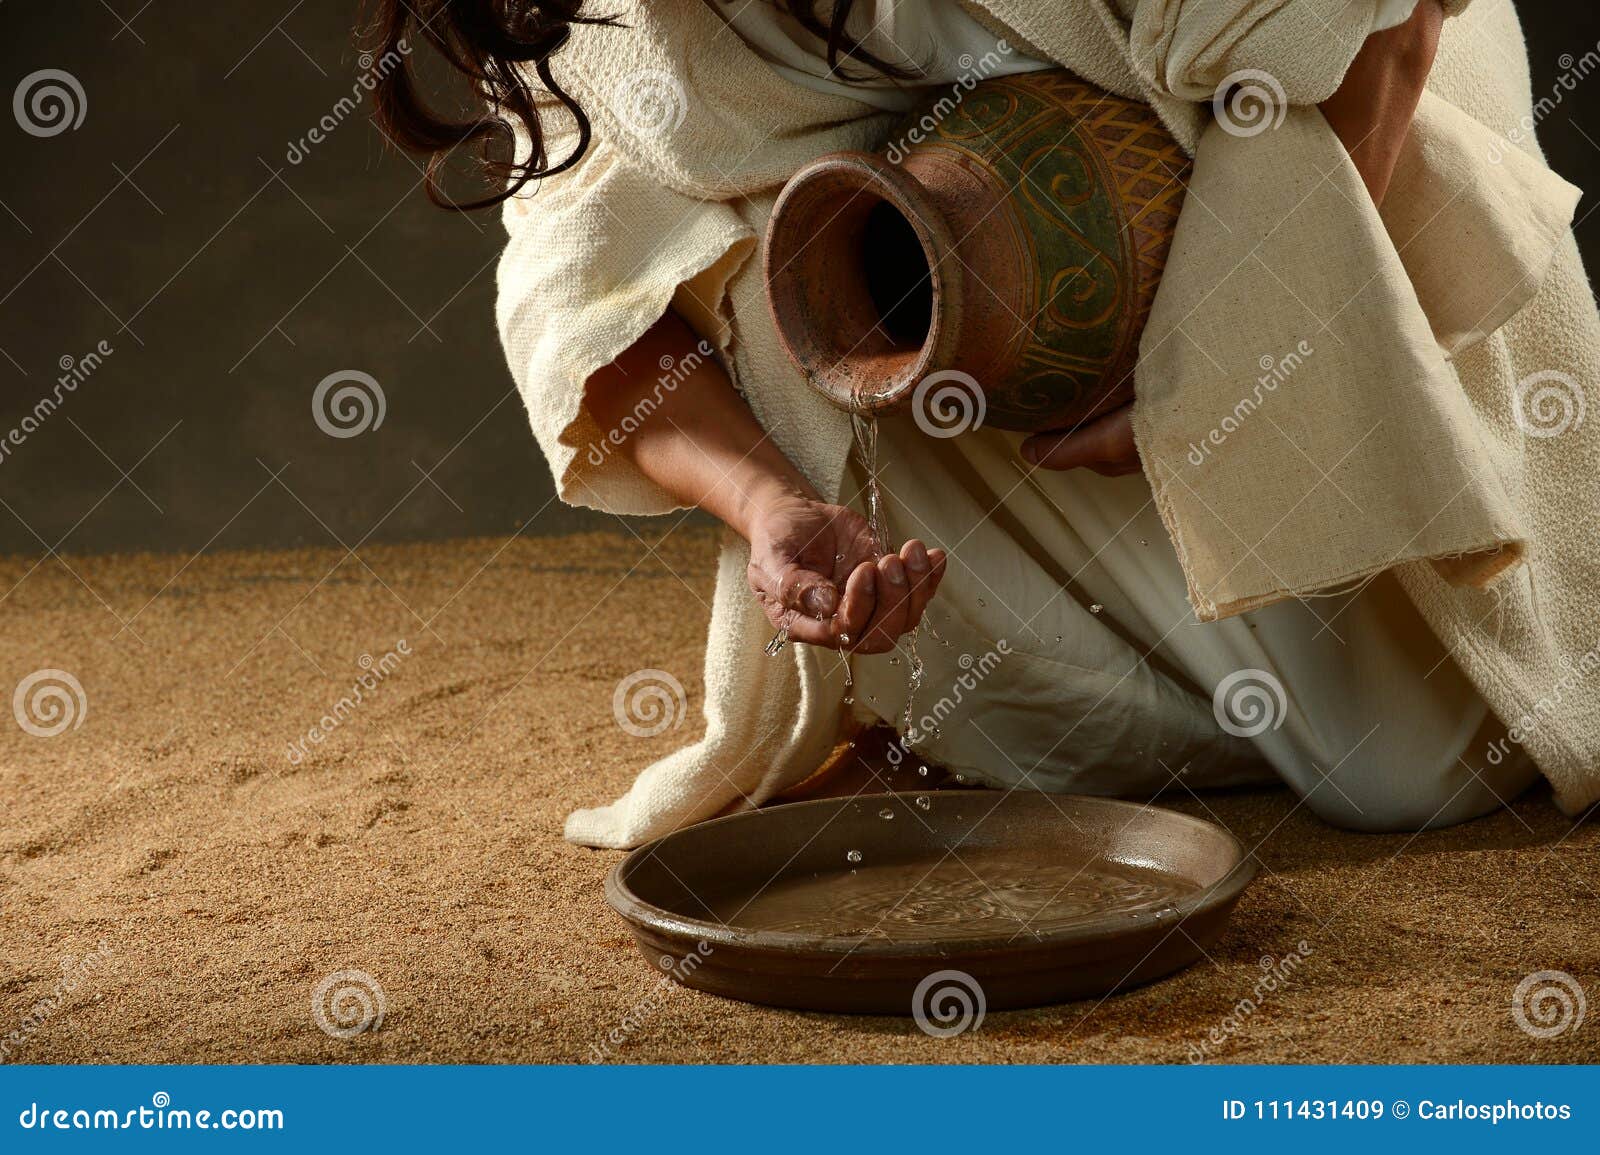 jesus pouring water from a jar